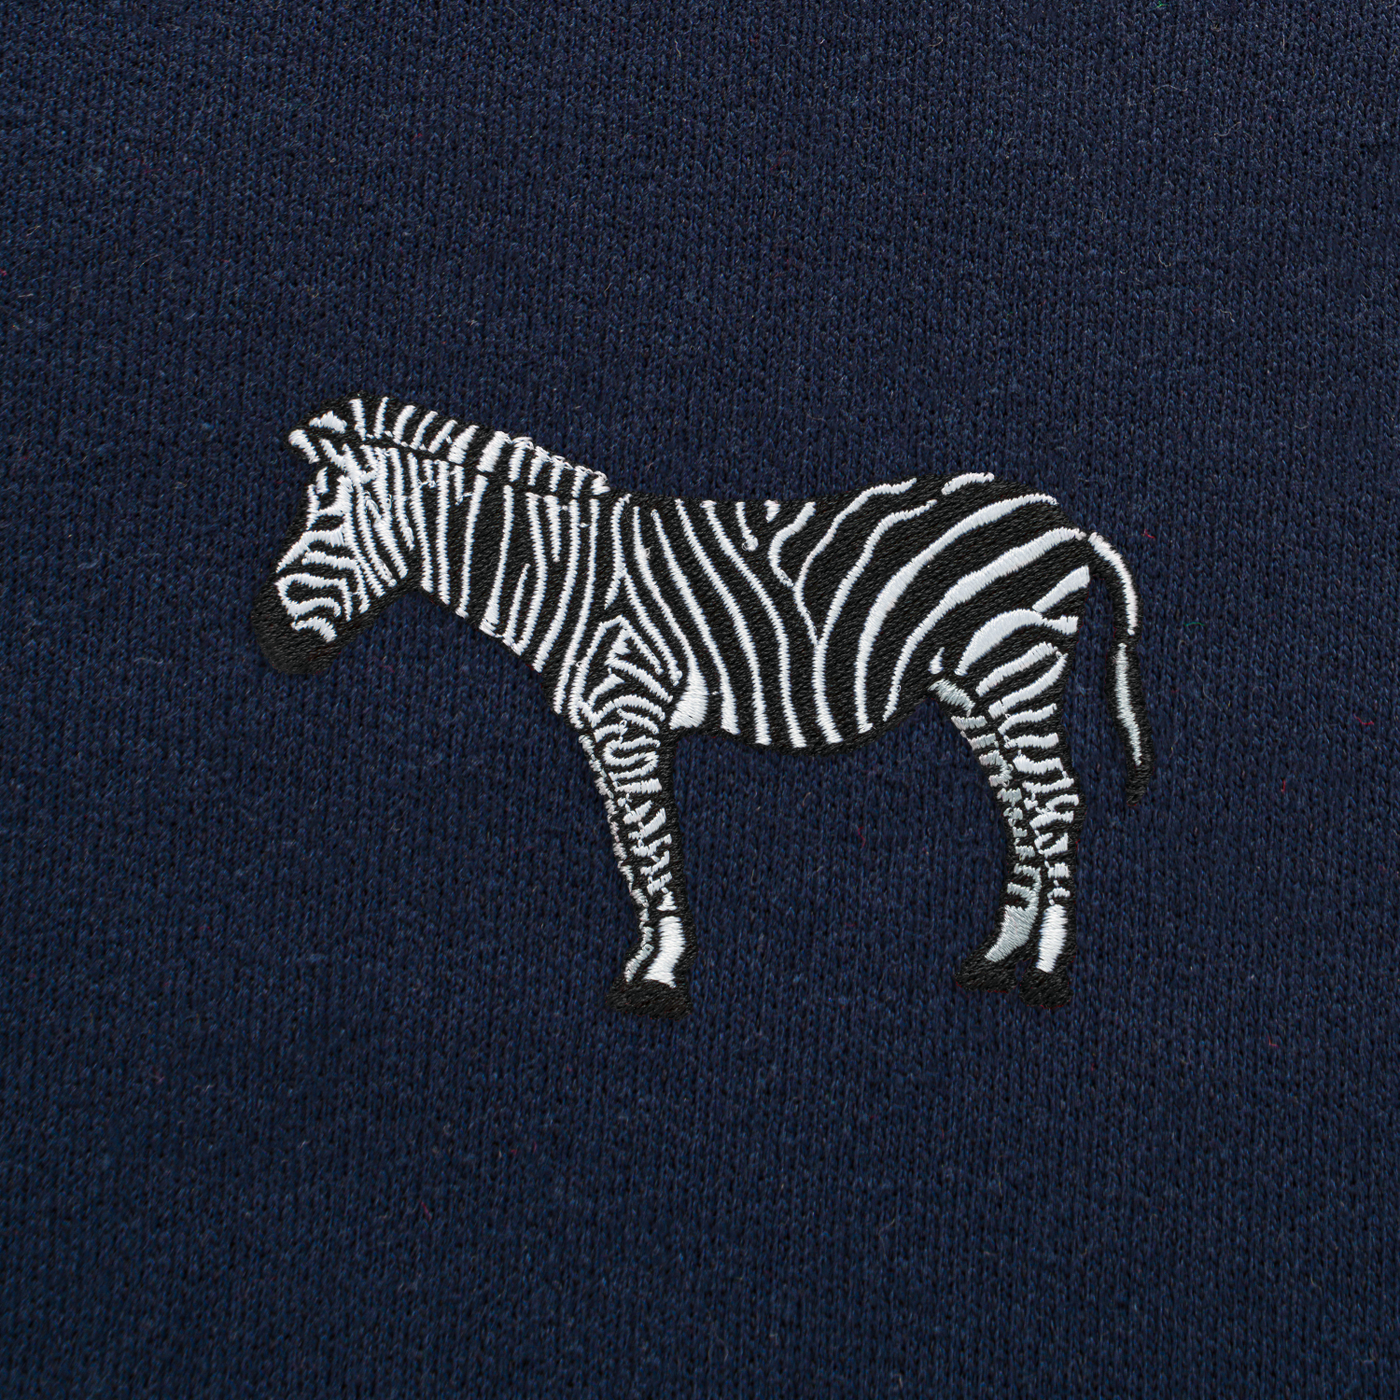 Bobby's Planet Men's Embroidered Zebra Sweatshirt from African Animals Collection in Navy Color#color_navy